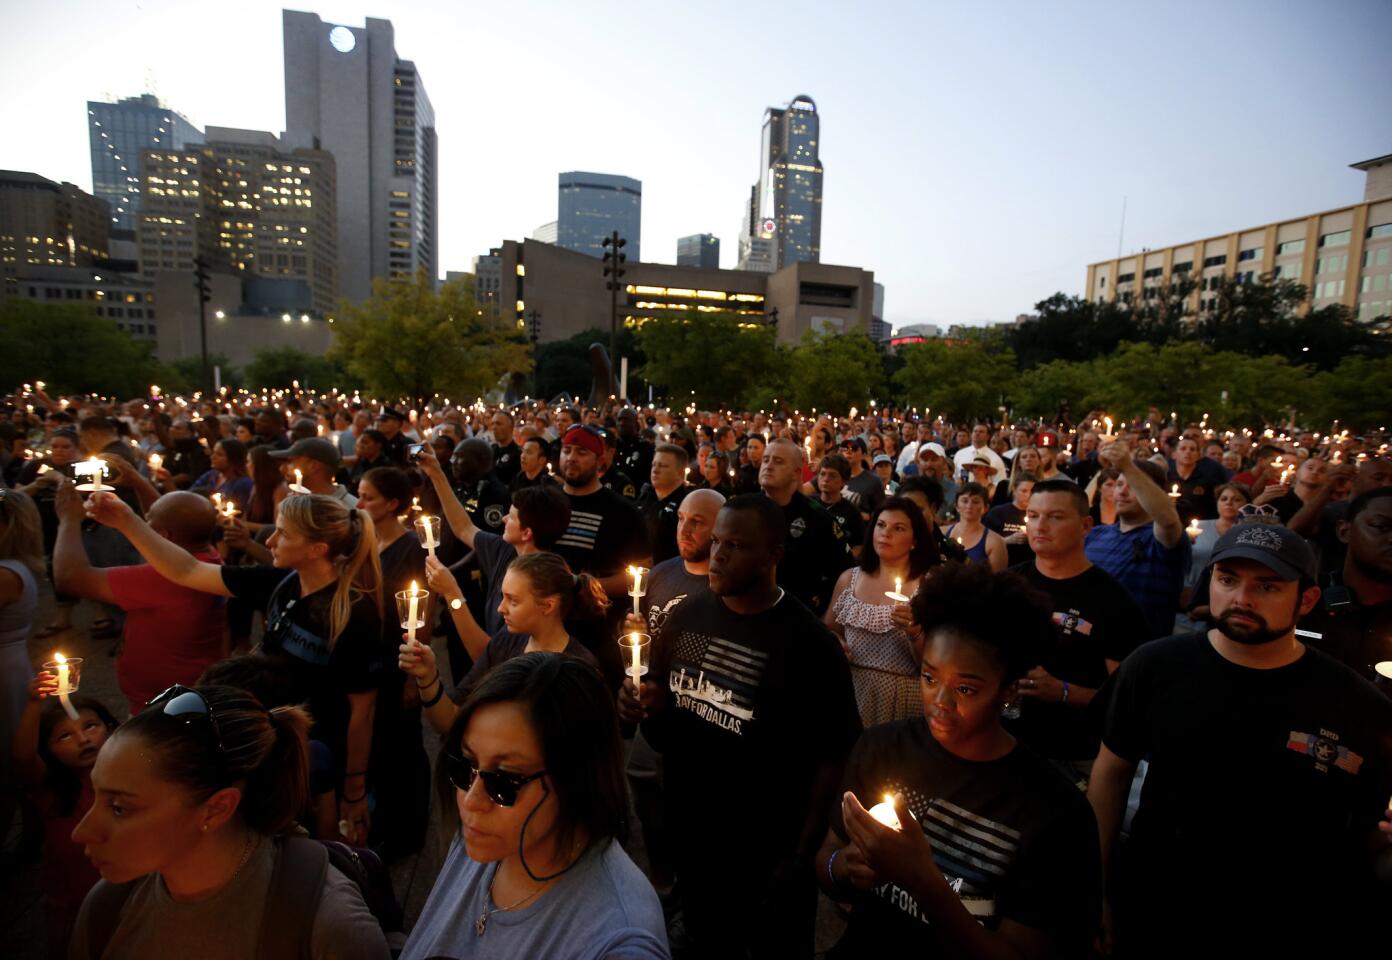 Candlelight vigil in Dallas for fallen officers